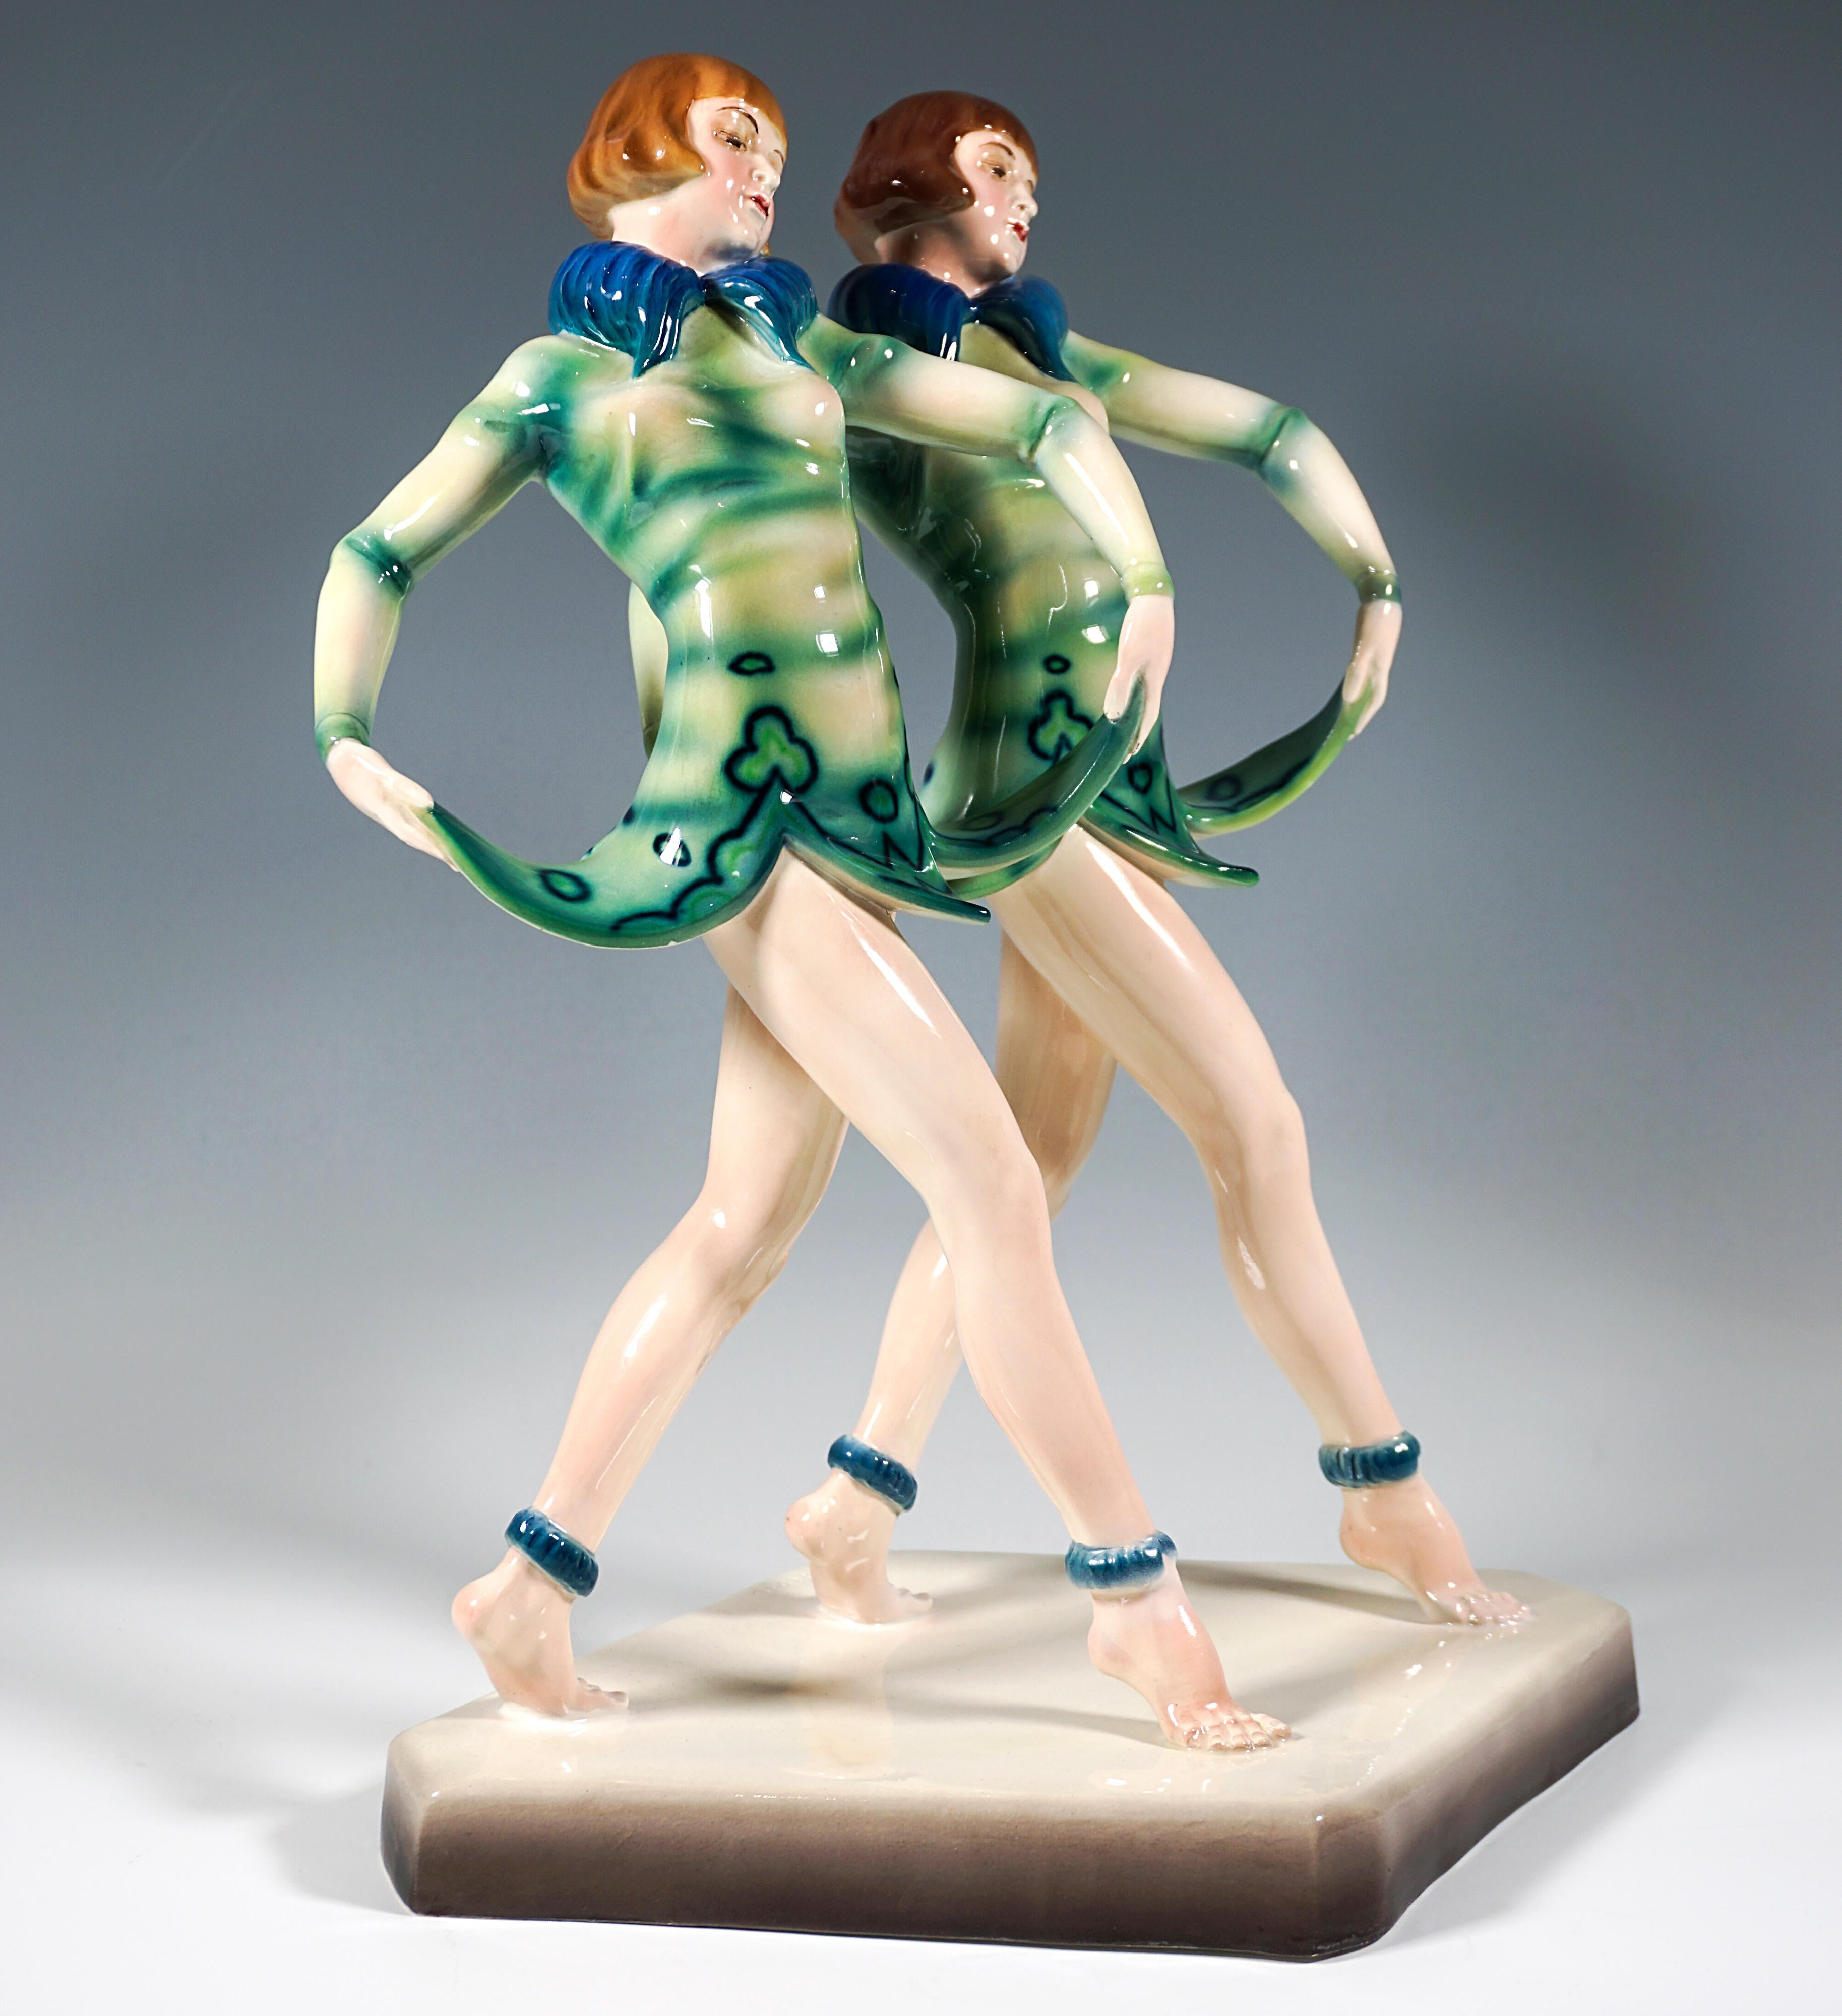 Remarkable and rare Goldscheider Art Deco Figurine Group of the later 1920s:
Two posing young revue twin dancers with pageboy hairstyles, performing a step forward in parallel, at the same time raising the bellflower-shaped hem of their short green